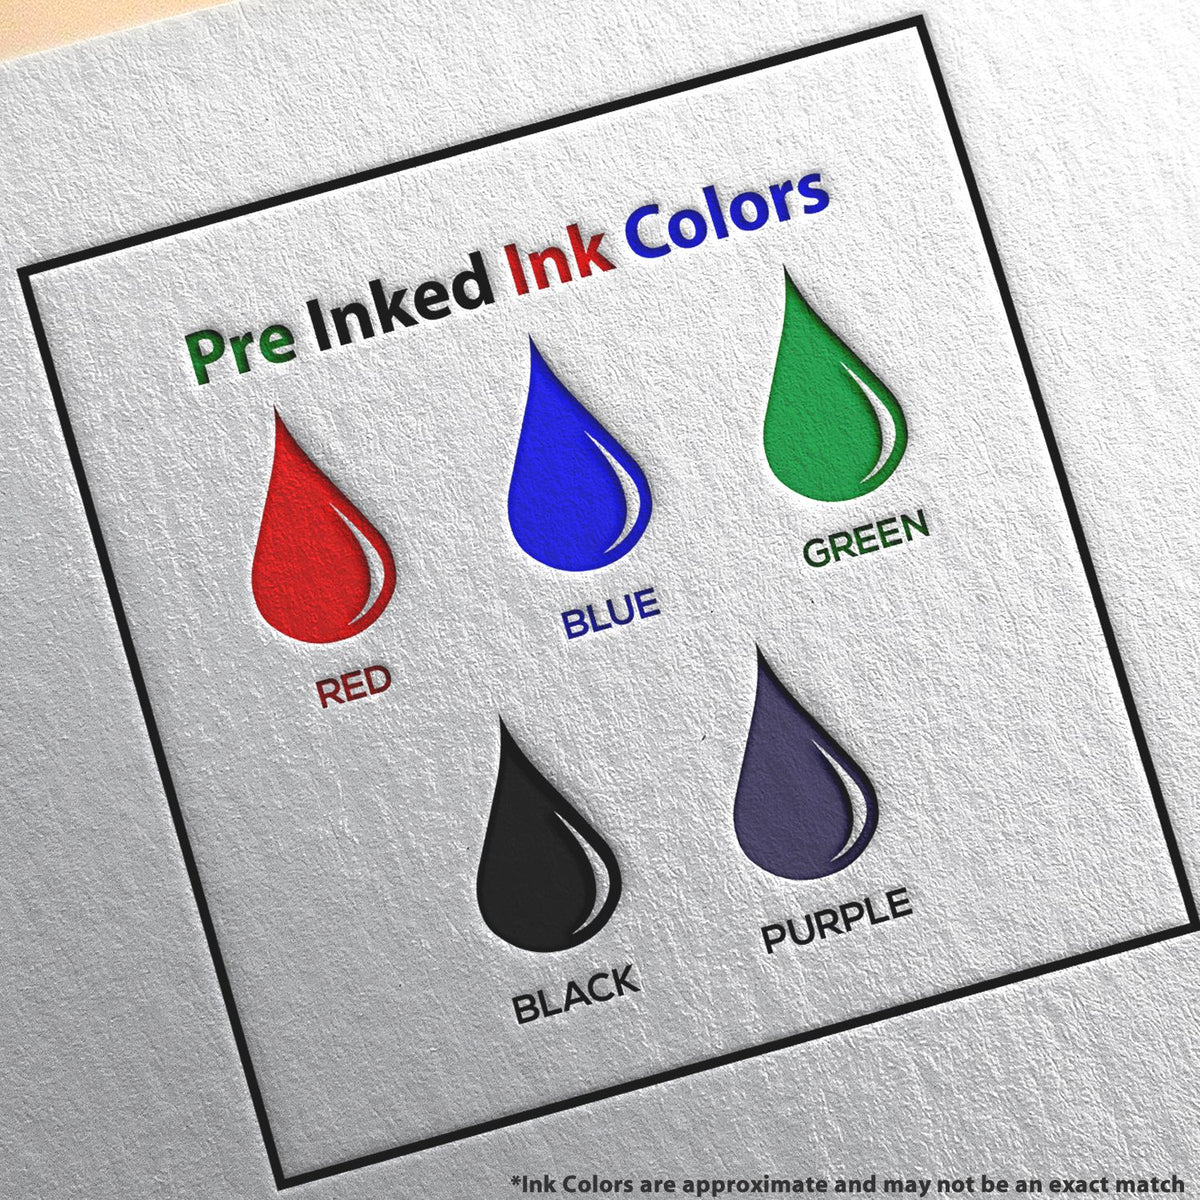 A picture showing the different ink colors or hues available for the Slim Pre-Inked Pennsylvania Landscape Architect Seal Stamp product.